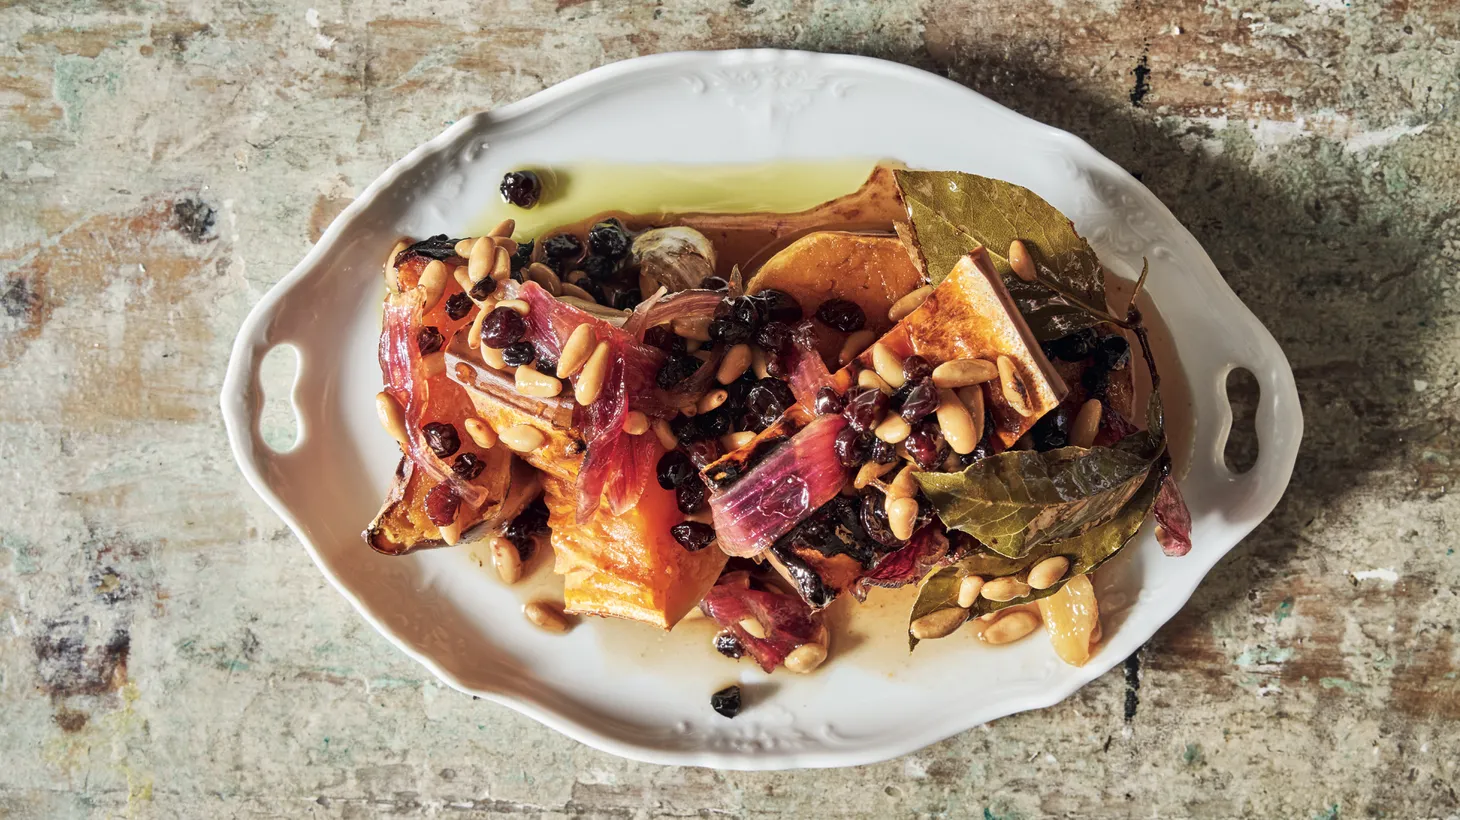 A roasted squash dish adorned with currants and pine nuts celebrates the season and rings in fall. Chef Jody Williams says it can be served warm or at room temperature and is even better the next day.